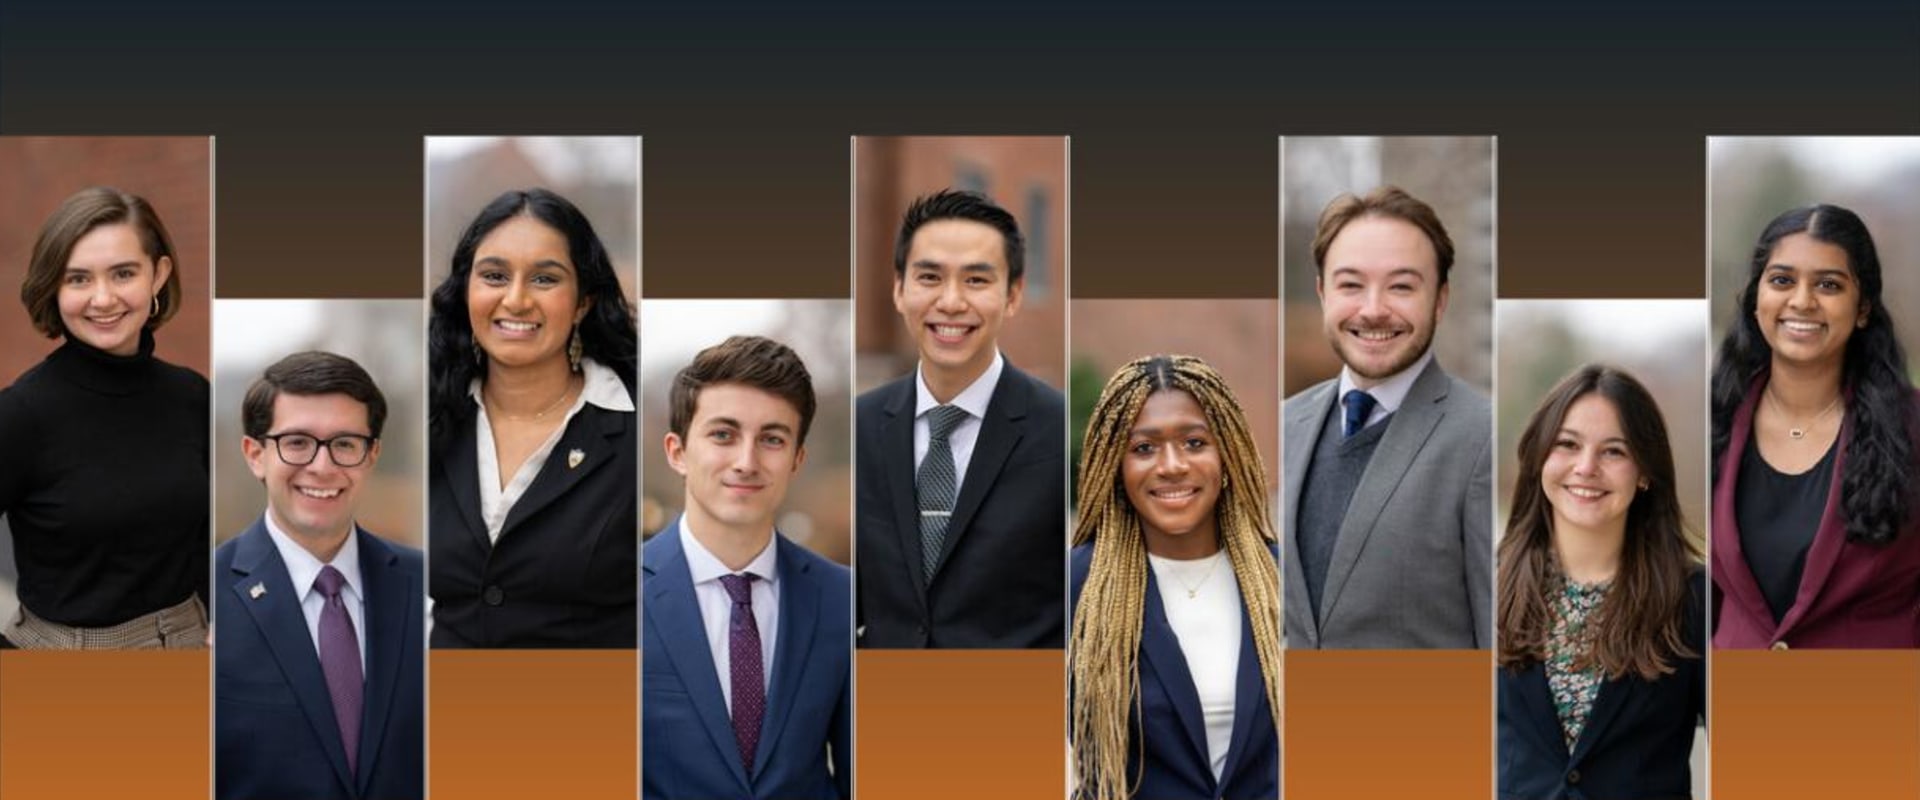 Diversity and Inclusion in Capitol Heights, MD: A Public Affairs Perspective